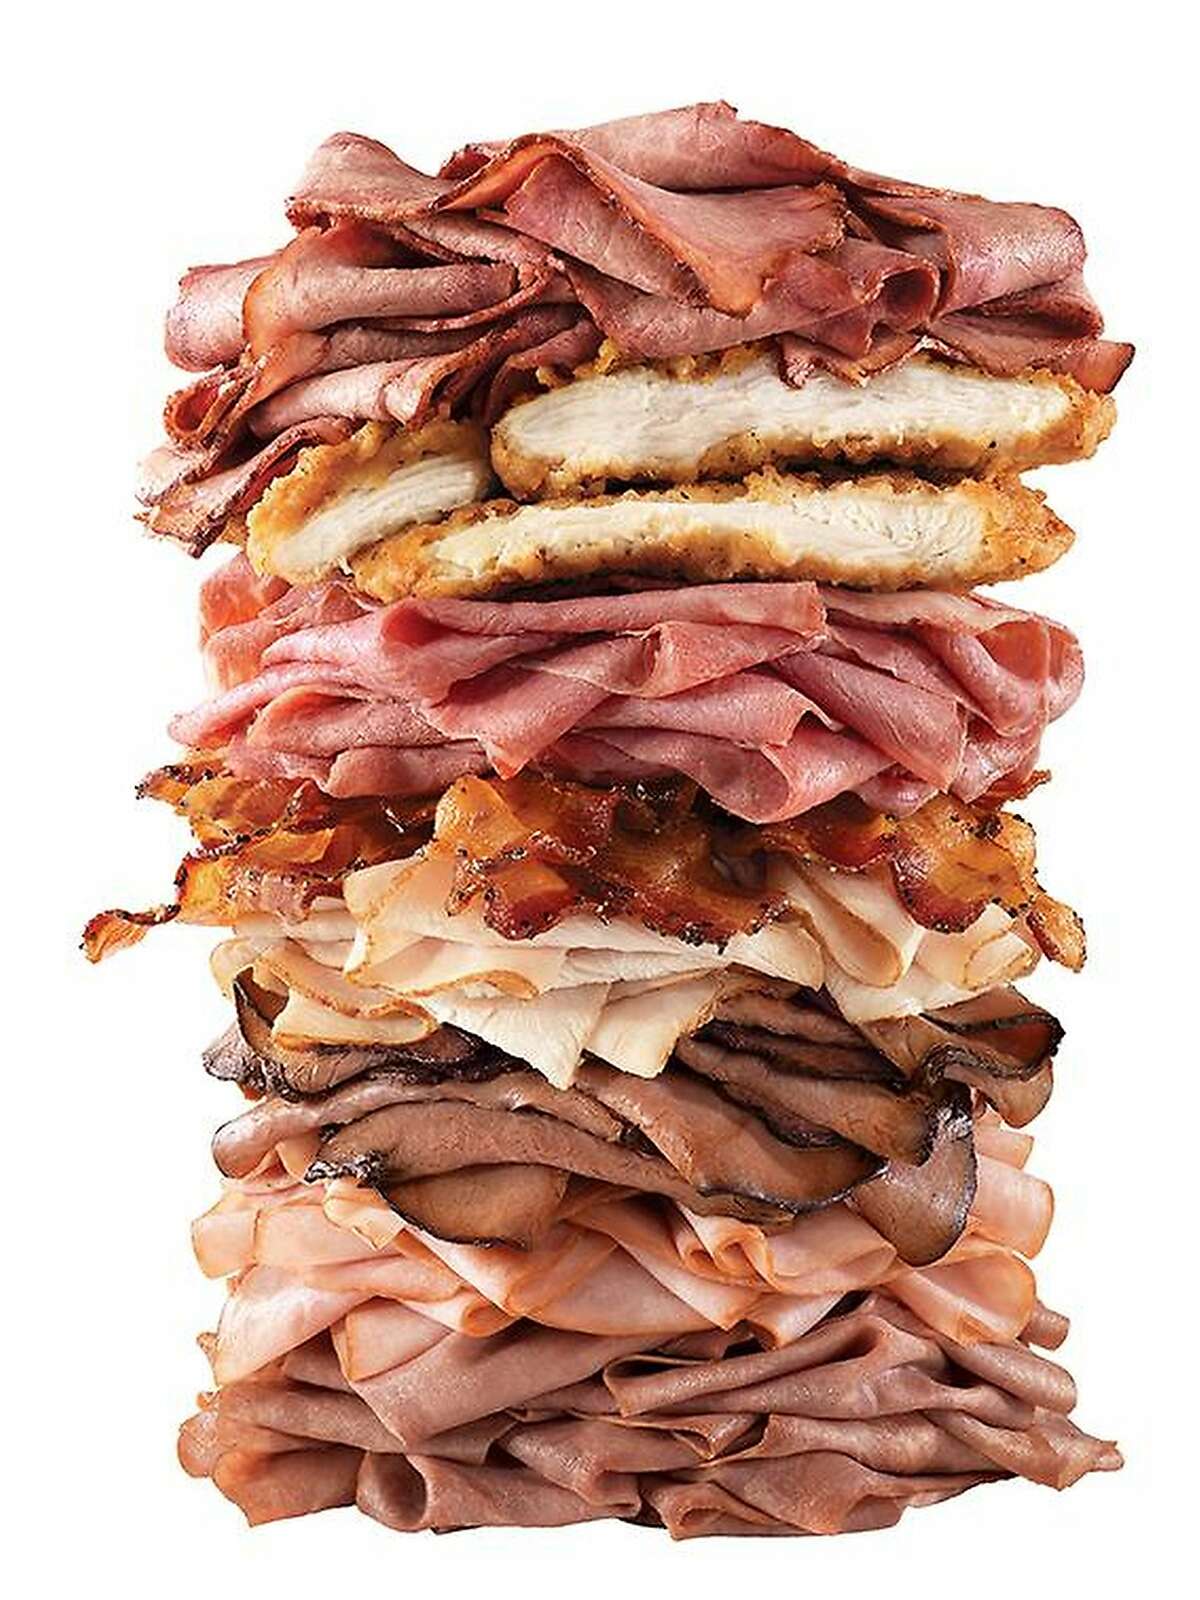 Arby’s Meat Mountain File this monstrosity under “The customer isn’t always right.” Arby’s posted a giant stack of various meats in a promotional photo to show that it didn’t only serve roast beef. However, customers took the photo as a literal ad for a sandwich. Thus, like an accidental Frankenstein’s monster, the Meat Mountain was added to Arby’s secret menu.  What is a Meat Mountain, exactly? All this lies within the bun: two chicken tenders, ham, roast turkey, brisket, corned beef, angus steak, Swiss cheese, cheddar cheese, and of course, bacon. The defibrillator will be extra.